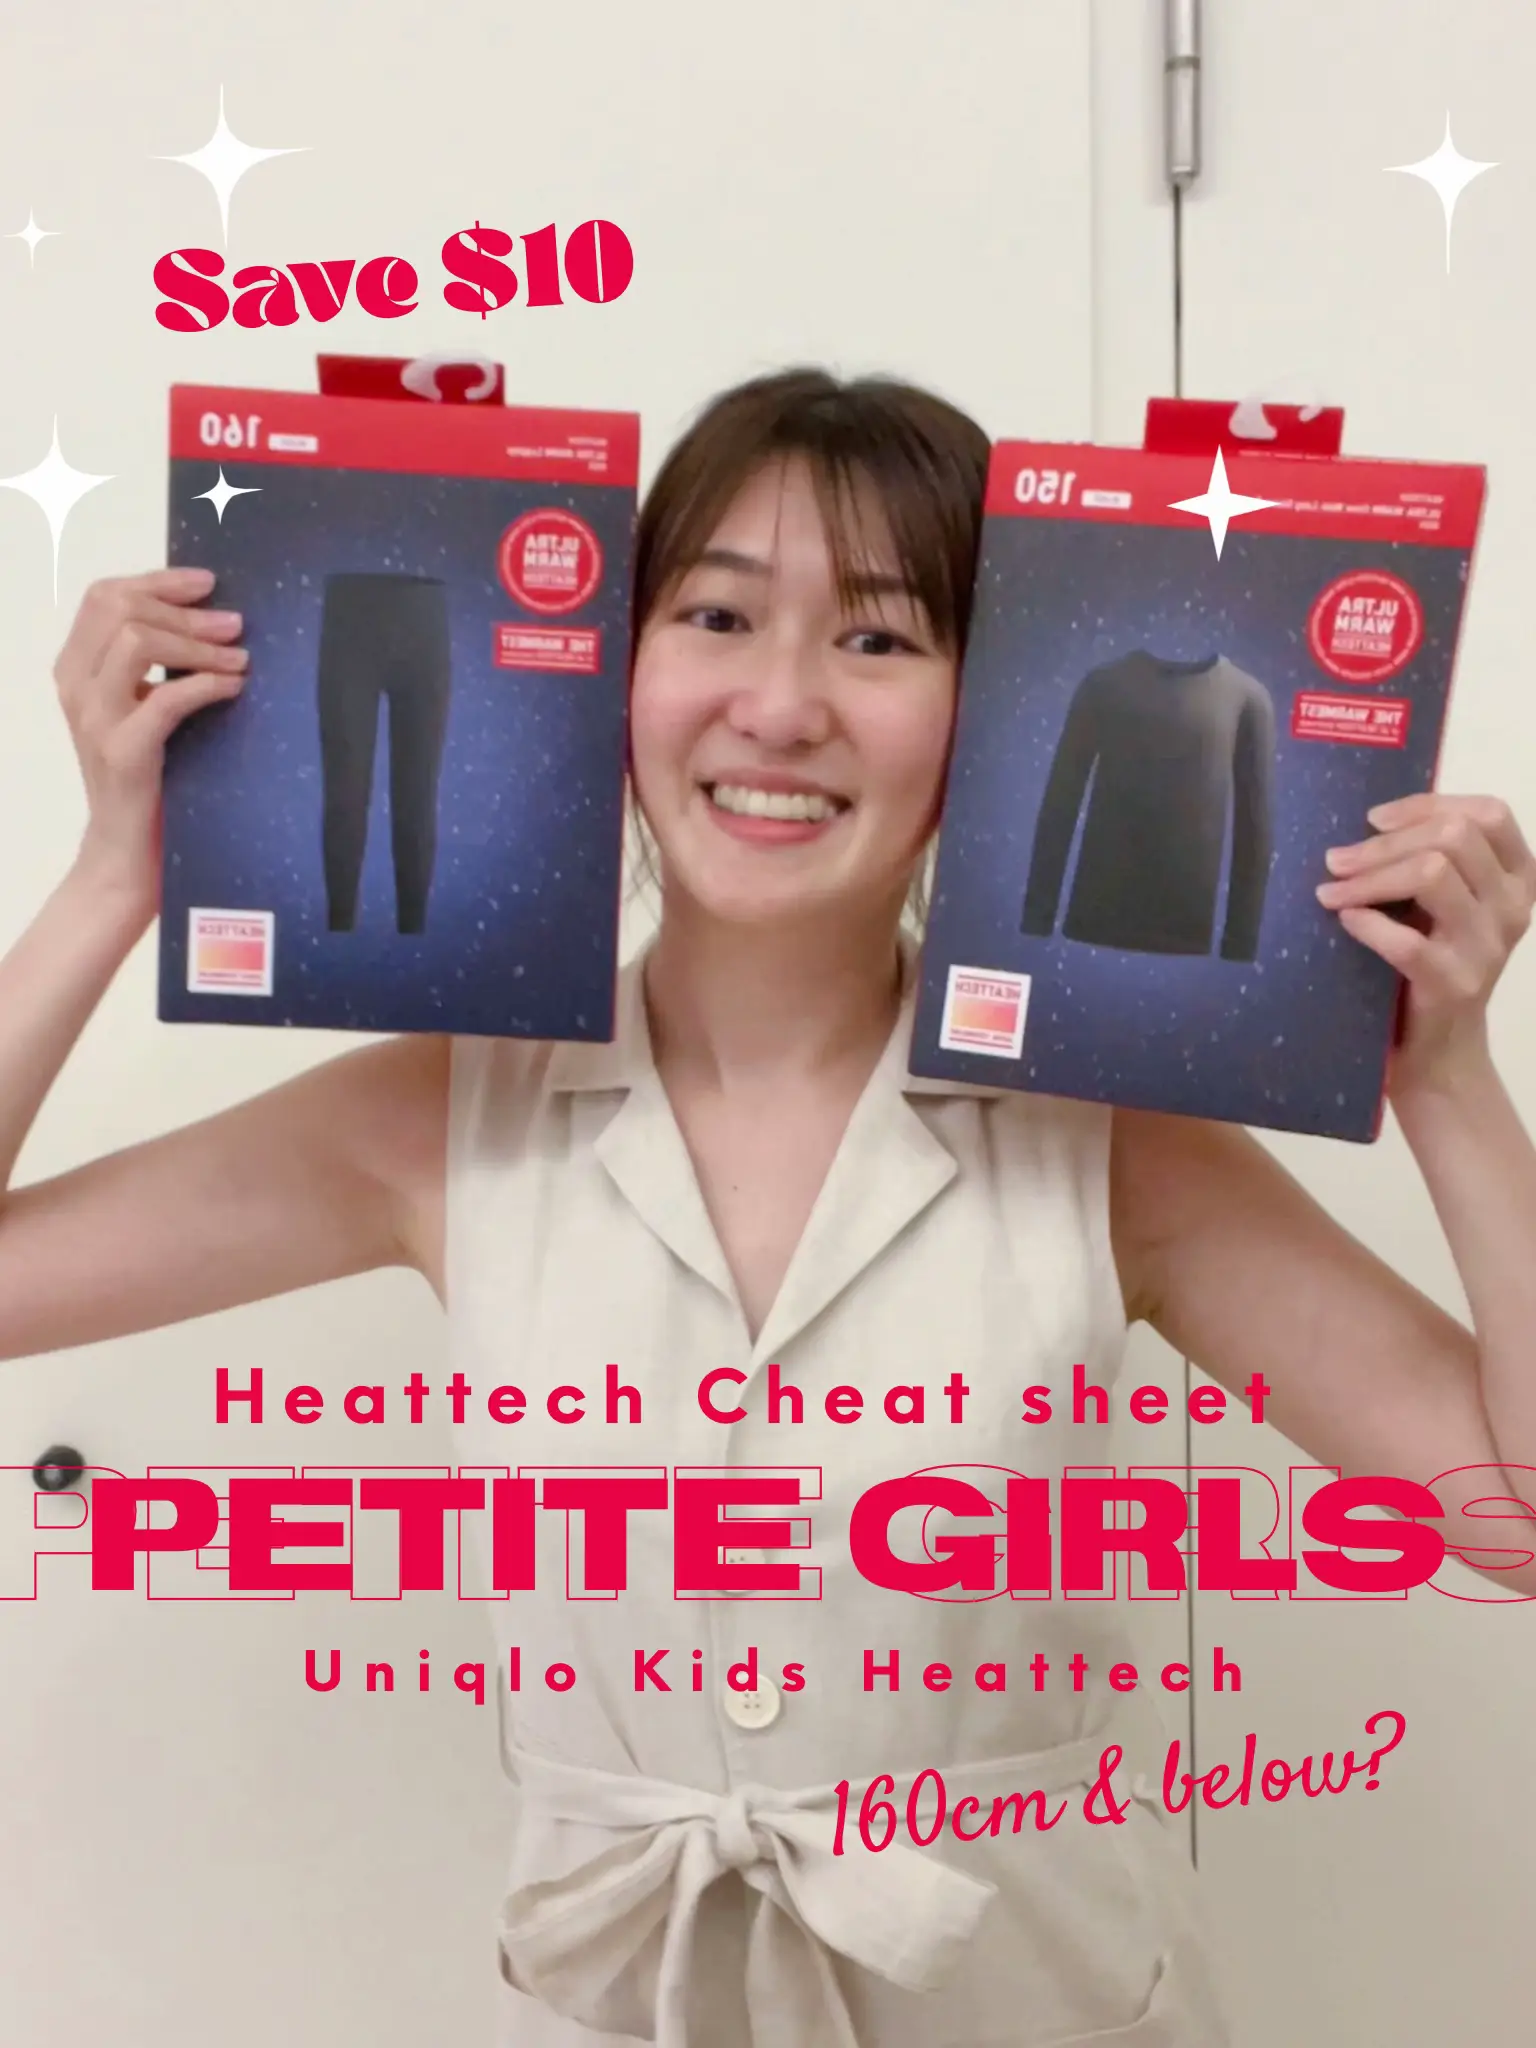 UNIQLO Malaysia - Our warmest HEATTECH yet - keeping you